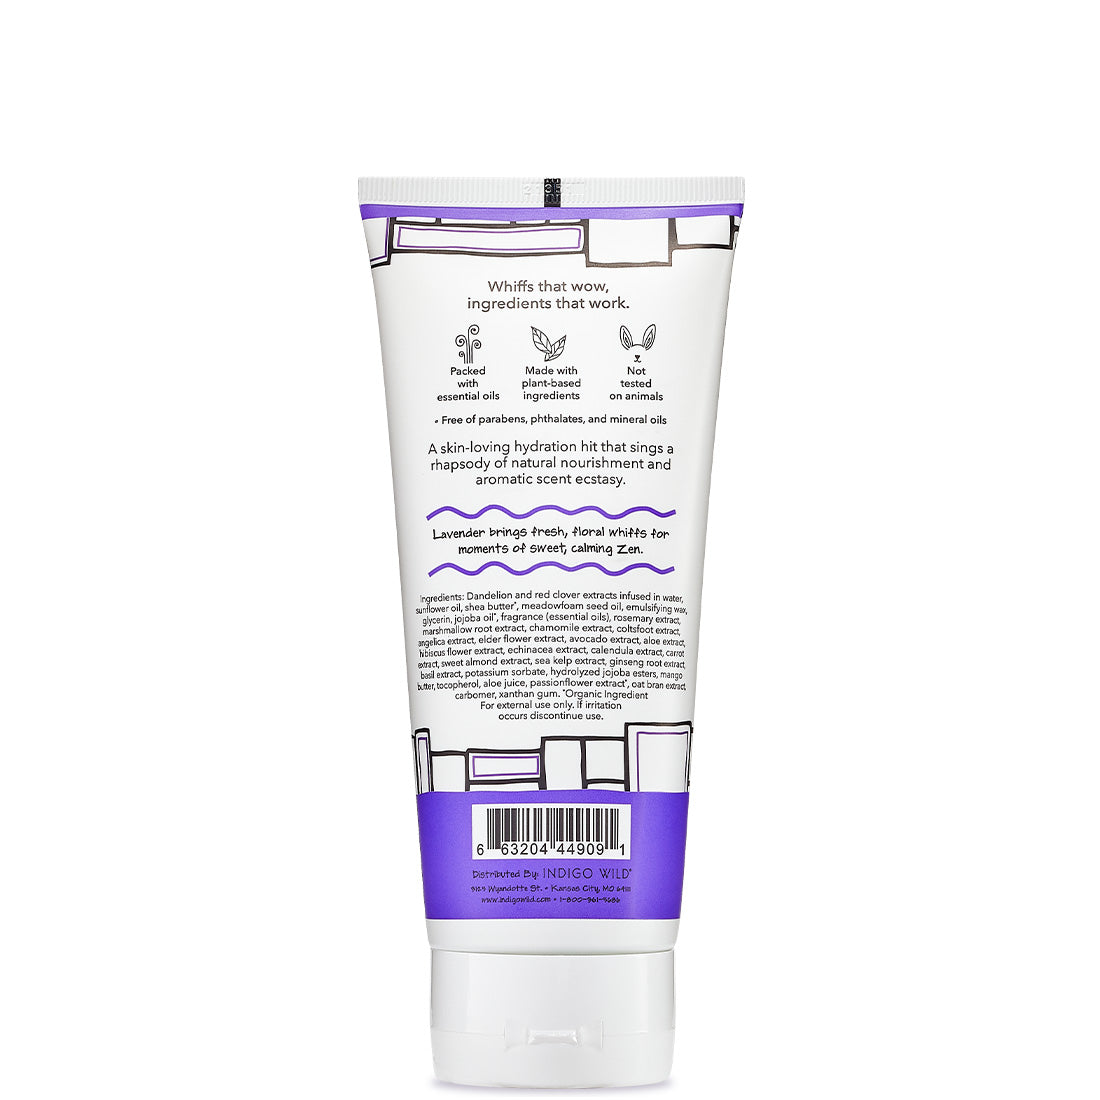 Back view of Lavender Zum hand and body lotion tube